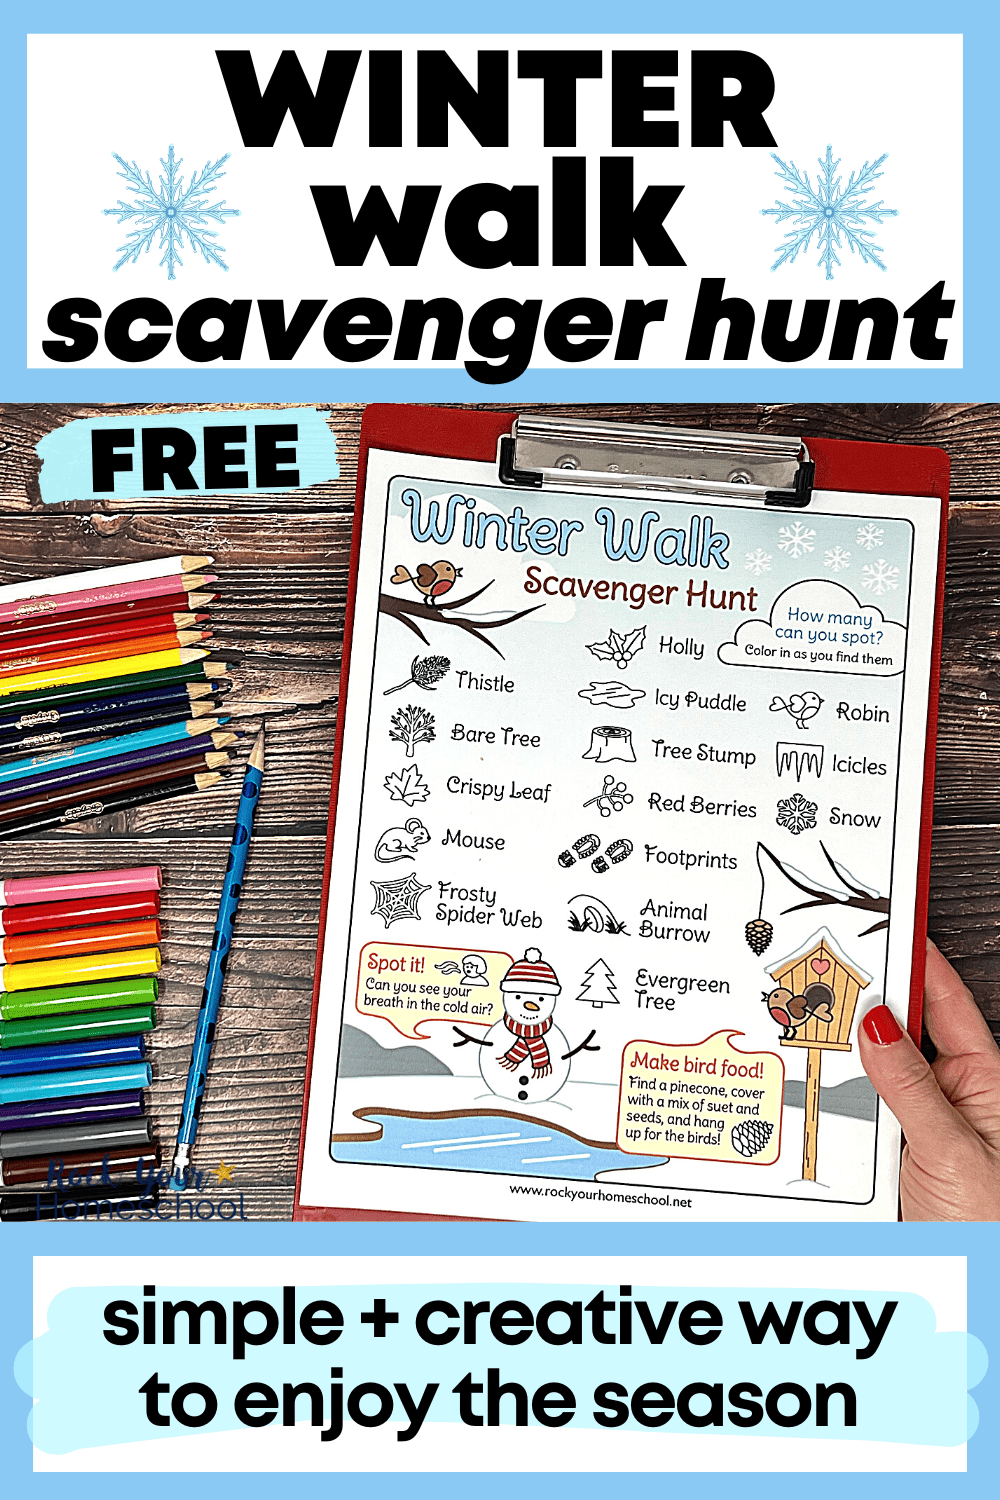 Winter Walk Scavenger Hunt for Kids: Free Printable for Special Fun Activity